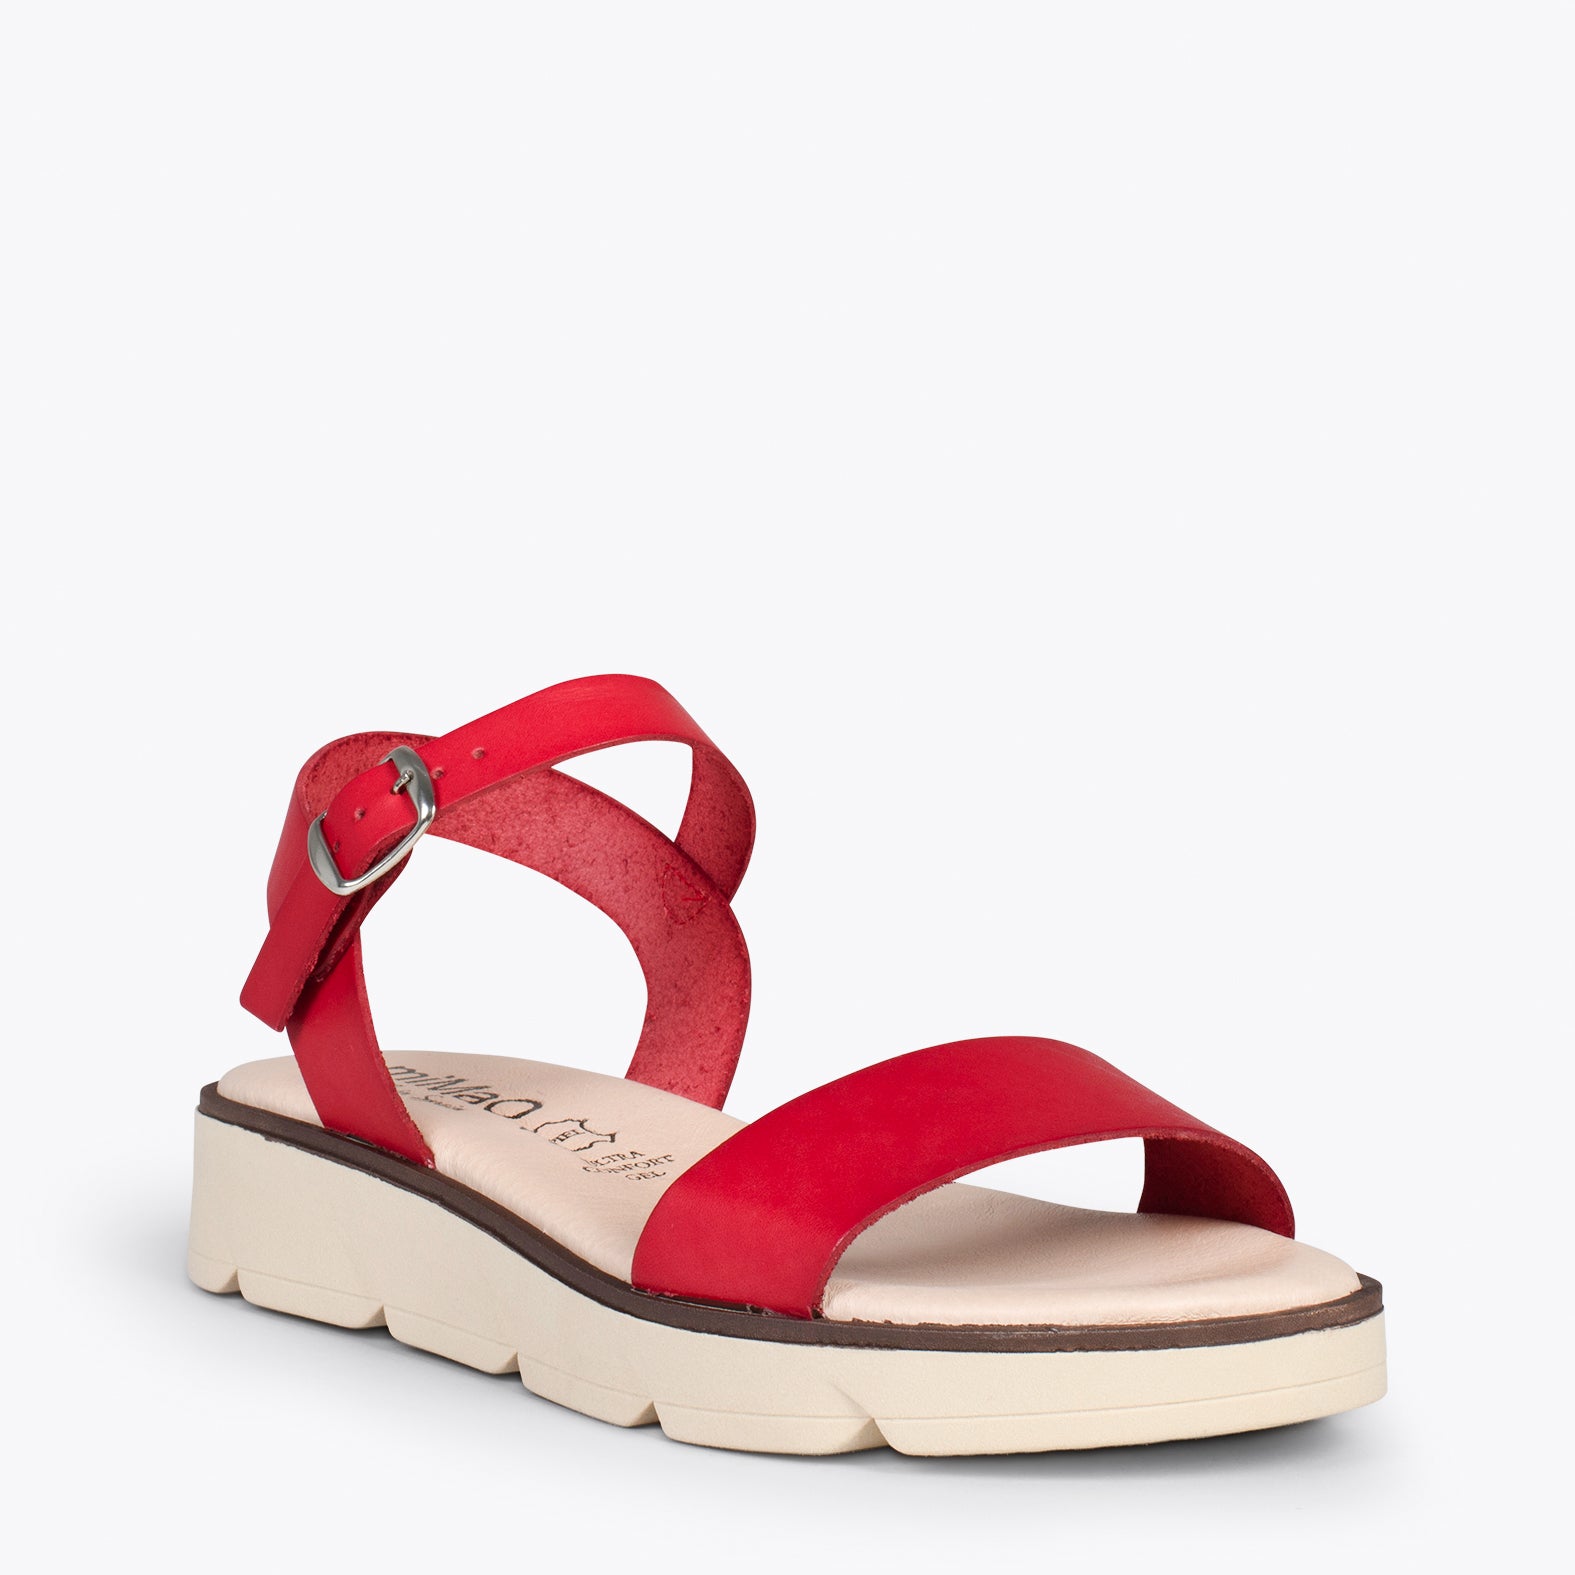 RIVER – RED leather flat sandals with wedge